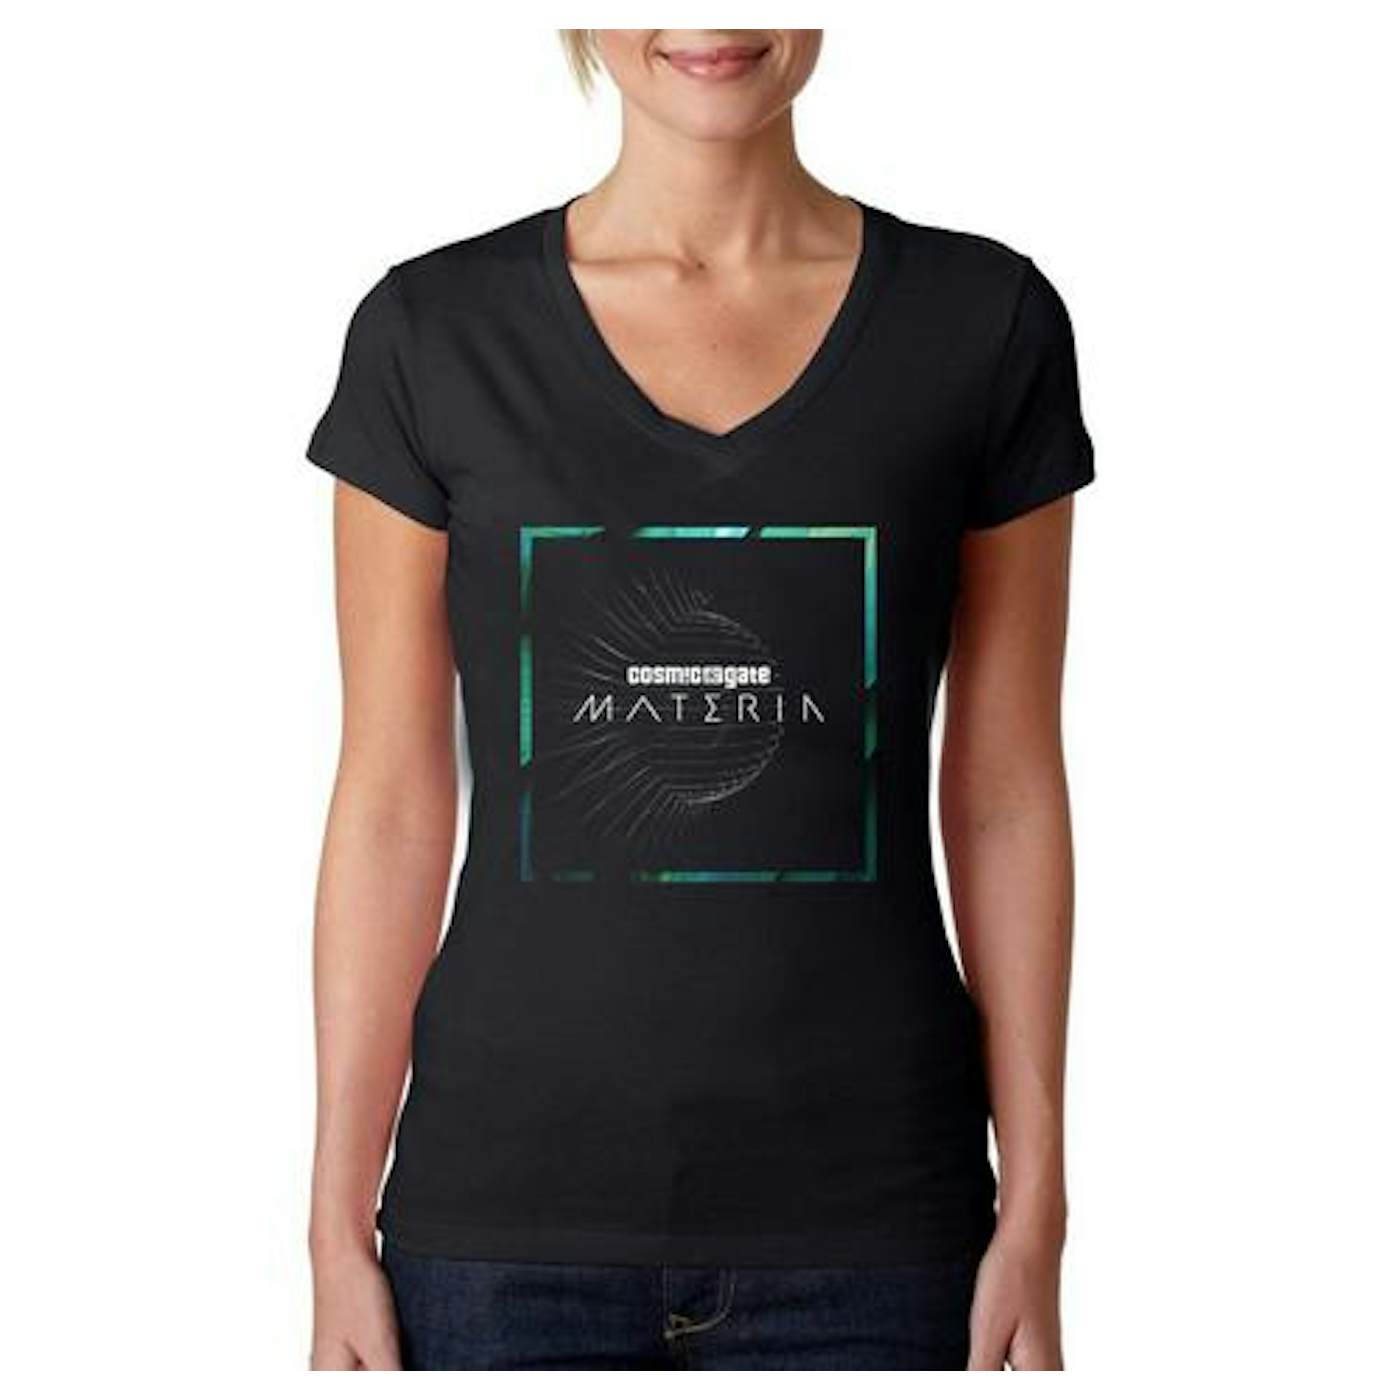 Cosmic Gate - Materia Limited Edition Shirt (Women)